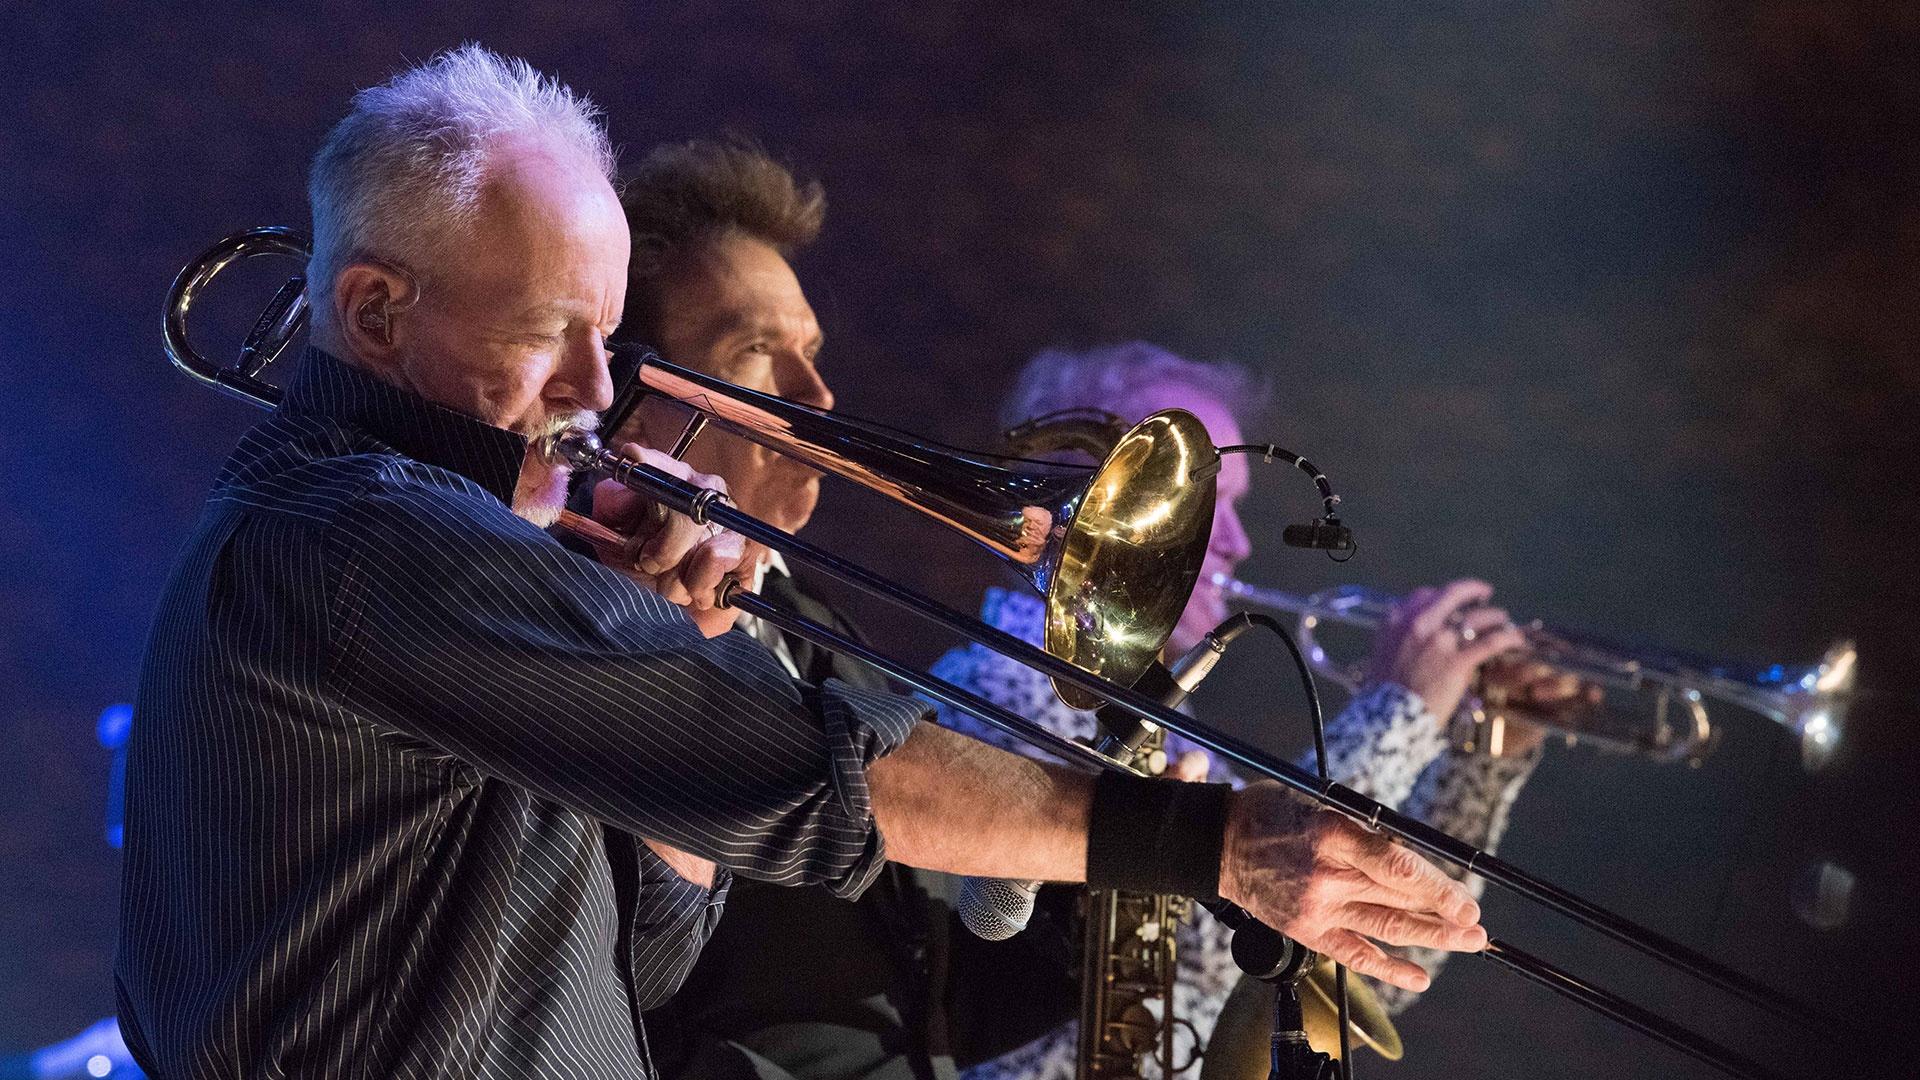 James Pankow leads the famous Chicago horn section on the "Soundstage" stage.